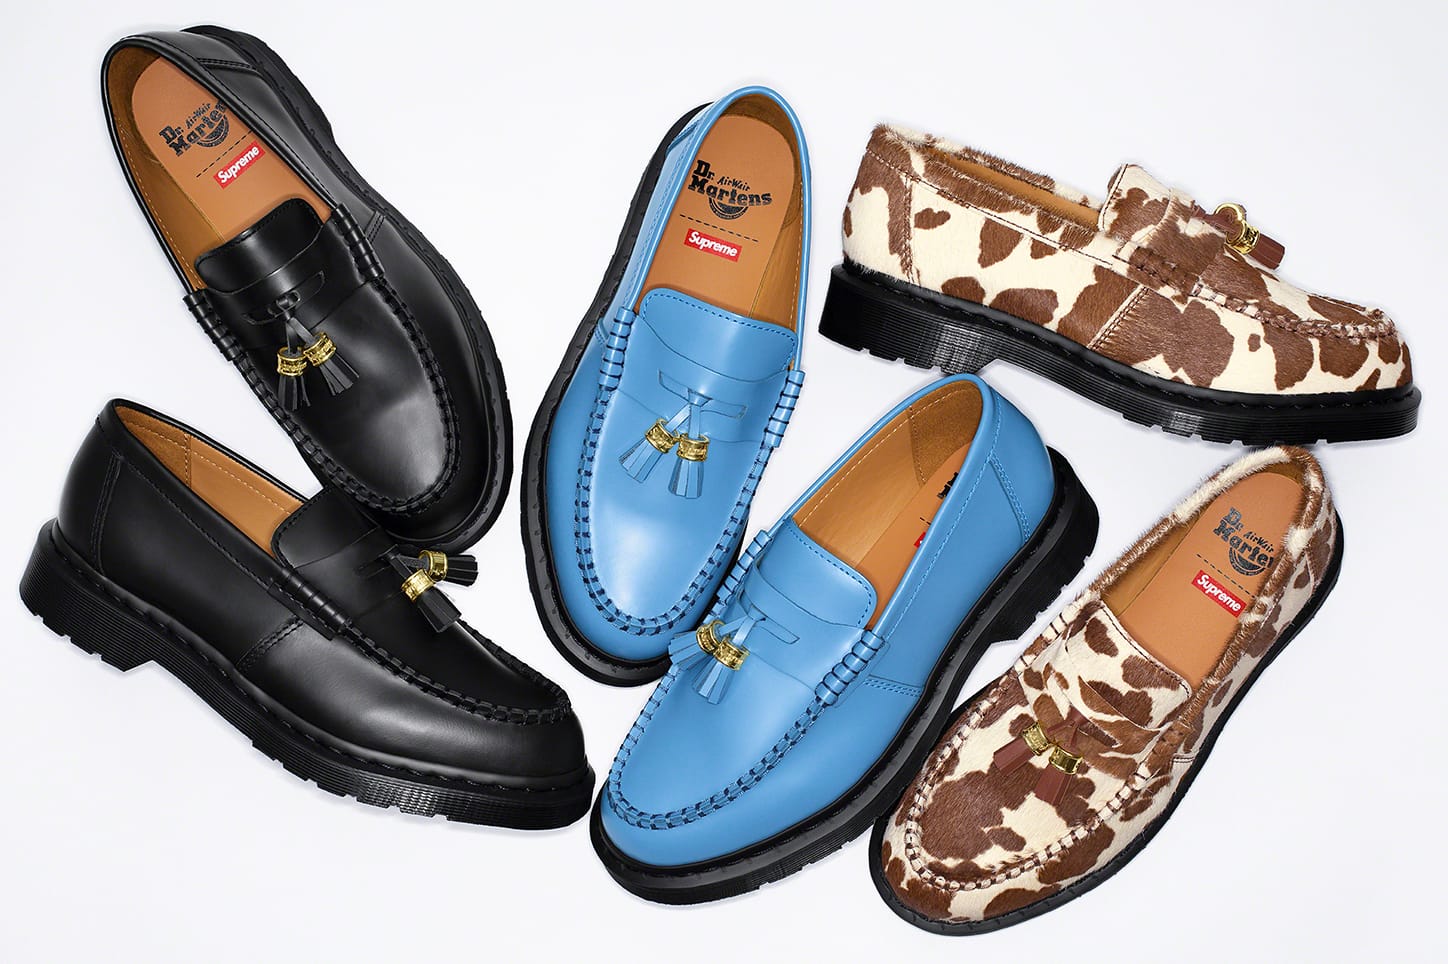 Dr. Martens x Stüssy 939 Collaboration Release | Hypebeast